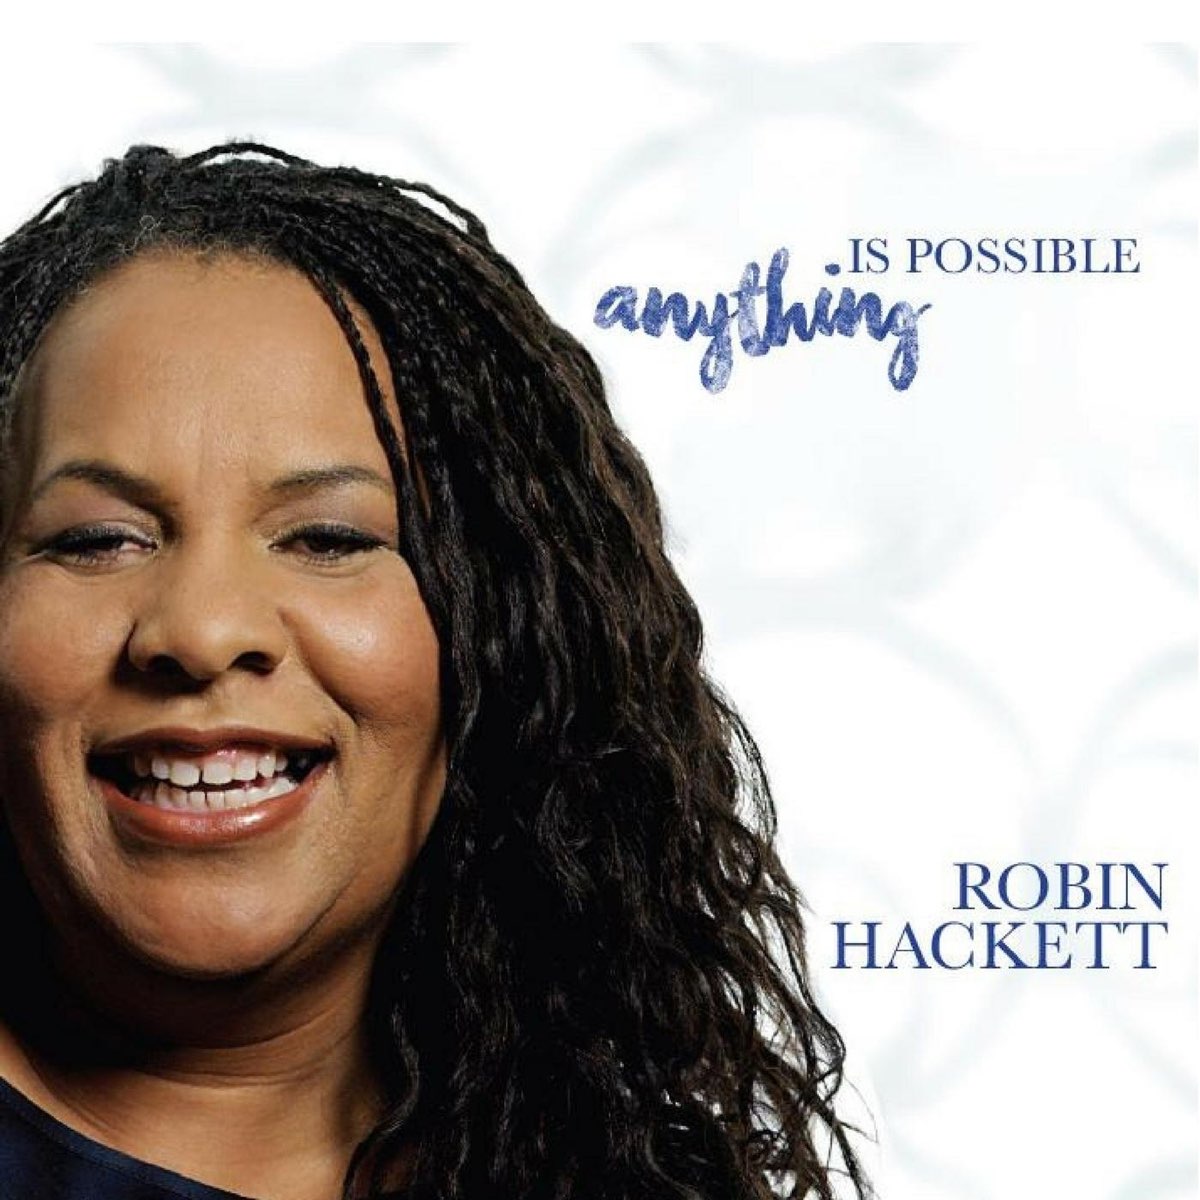 Anything Is Possible by Robin Hackett